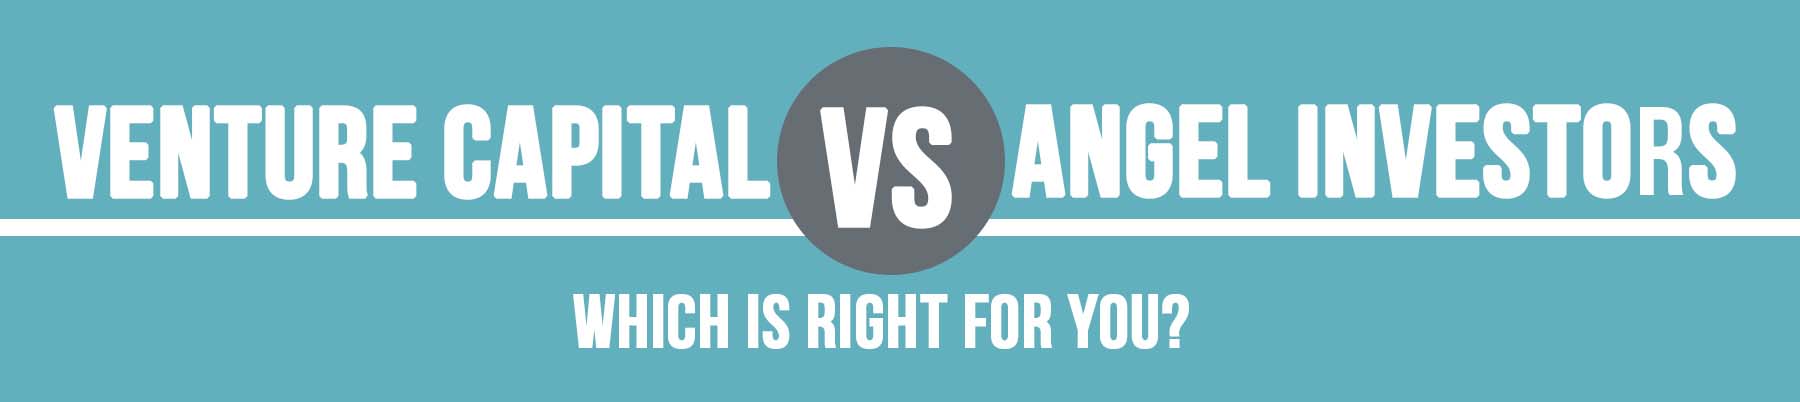 Venture Capital vs Angel Investors: Which is Right for You?